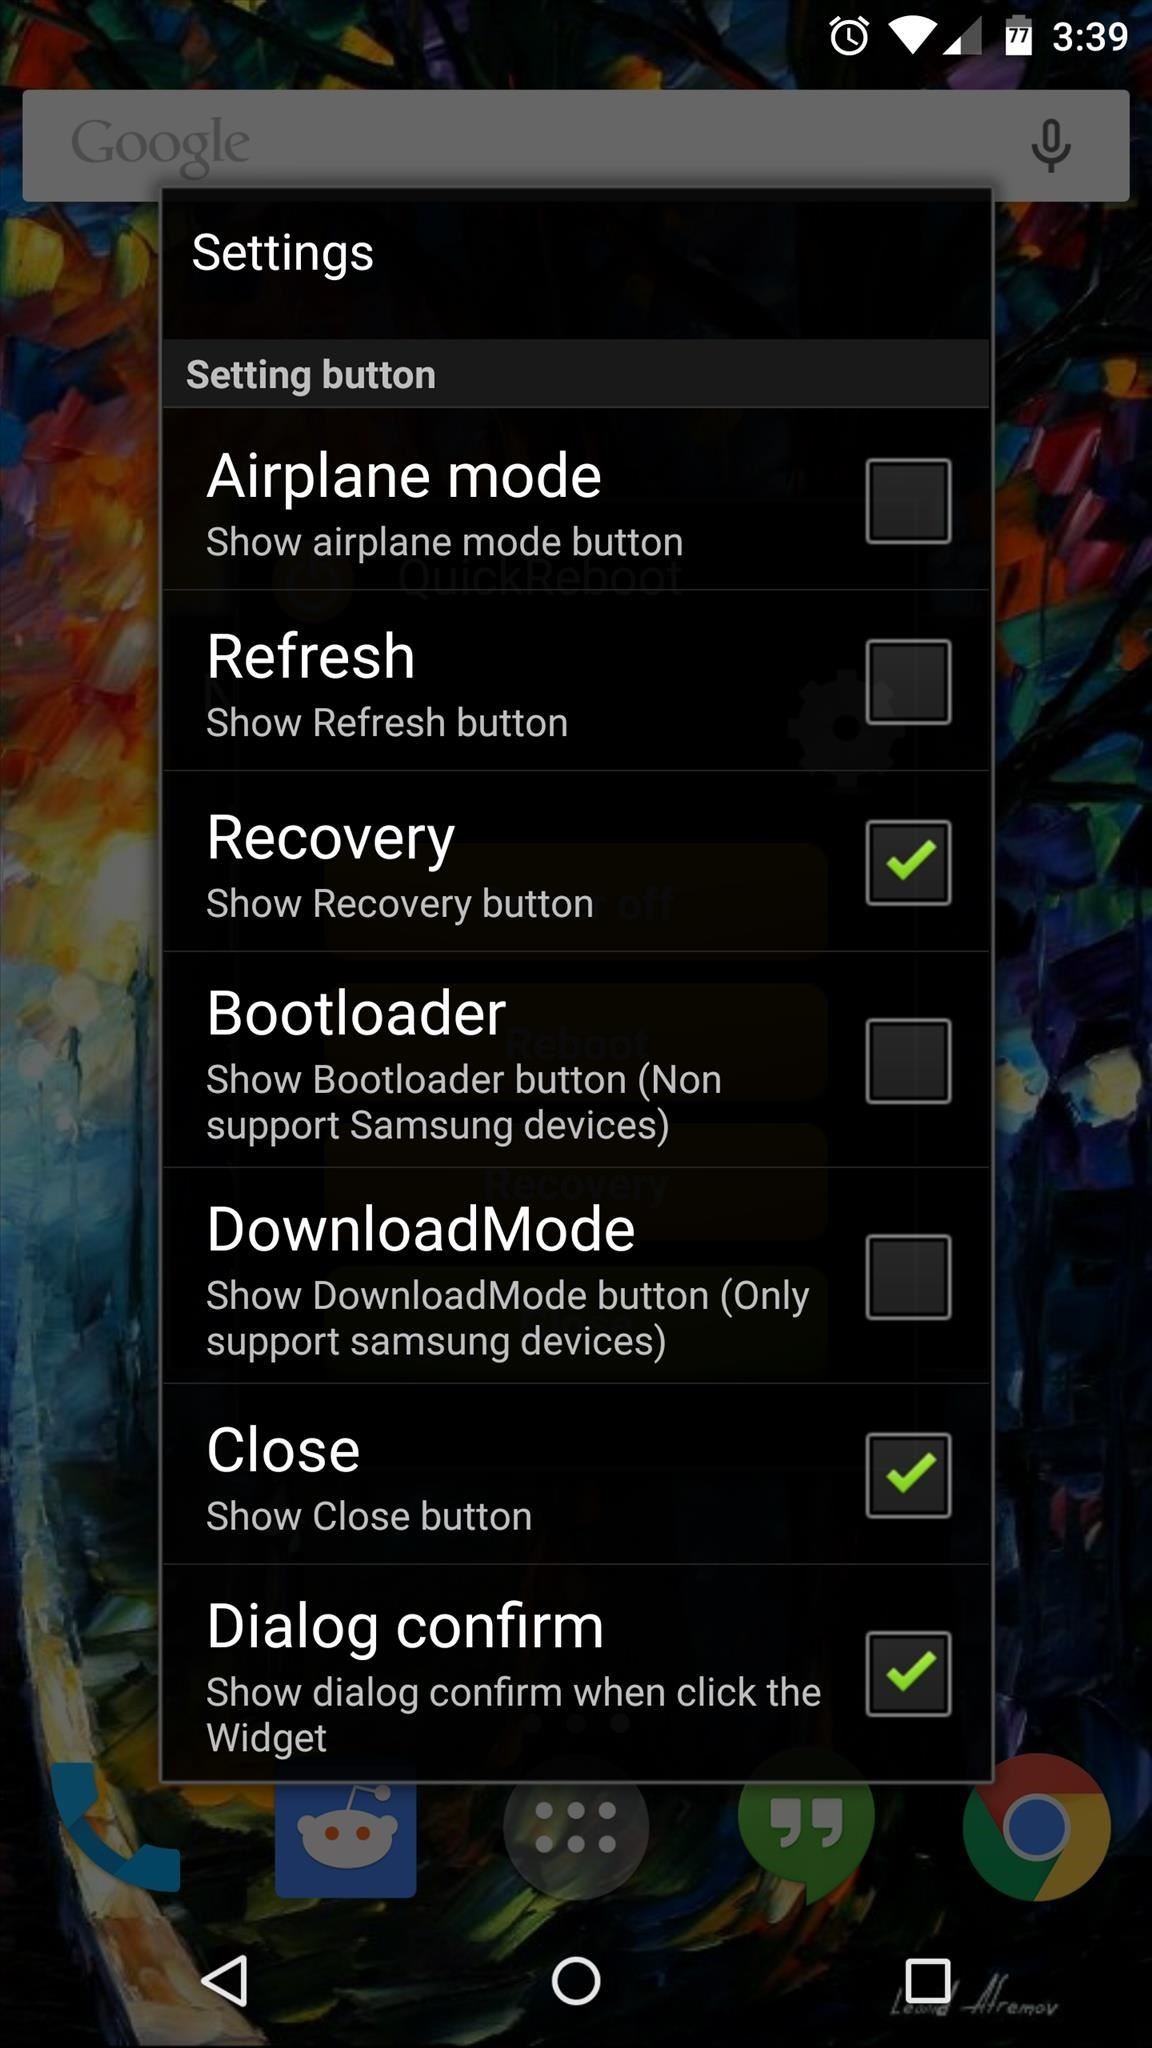 Add a Full "Reboot" Menu to Android 5.0 Lollipop